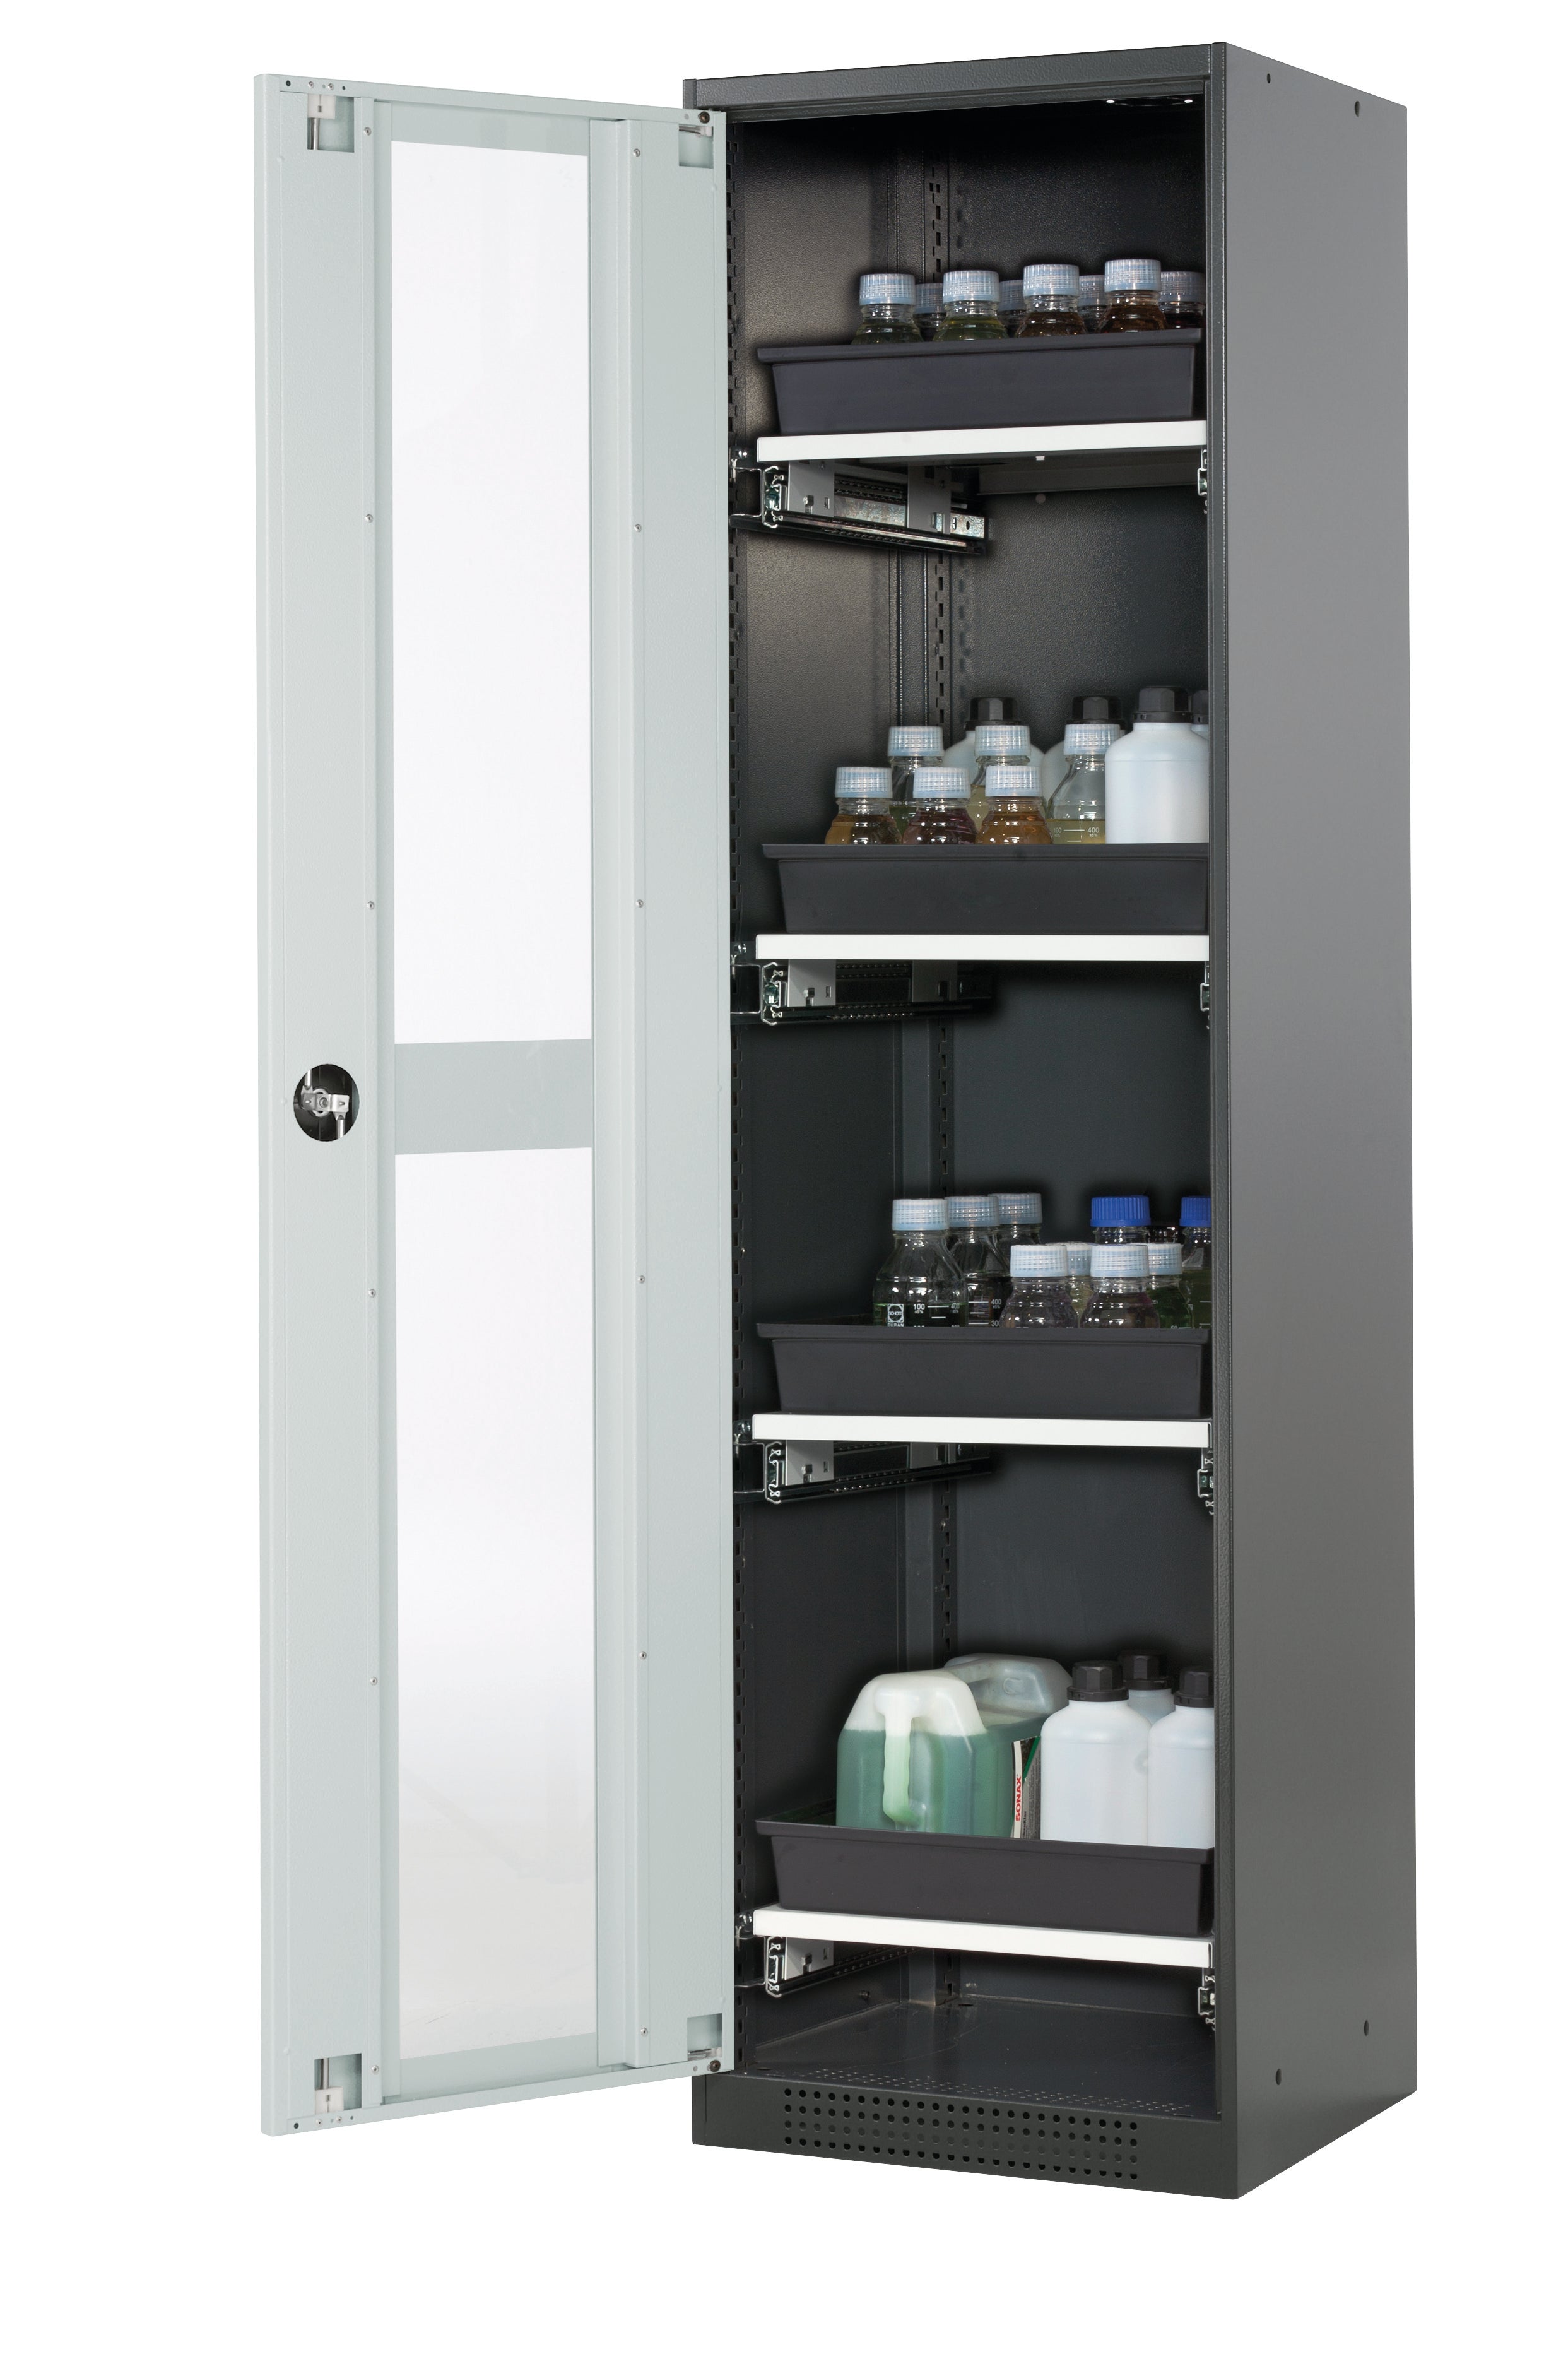 Chemical cabinet CS-CLASSIC-G model CS.195.054.WDFW in light gray RAL 7035 with 4x AbZ pull-out shelves (sheet steel/polypropylene)